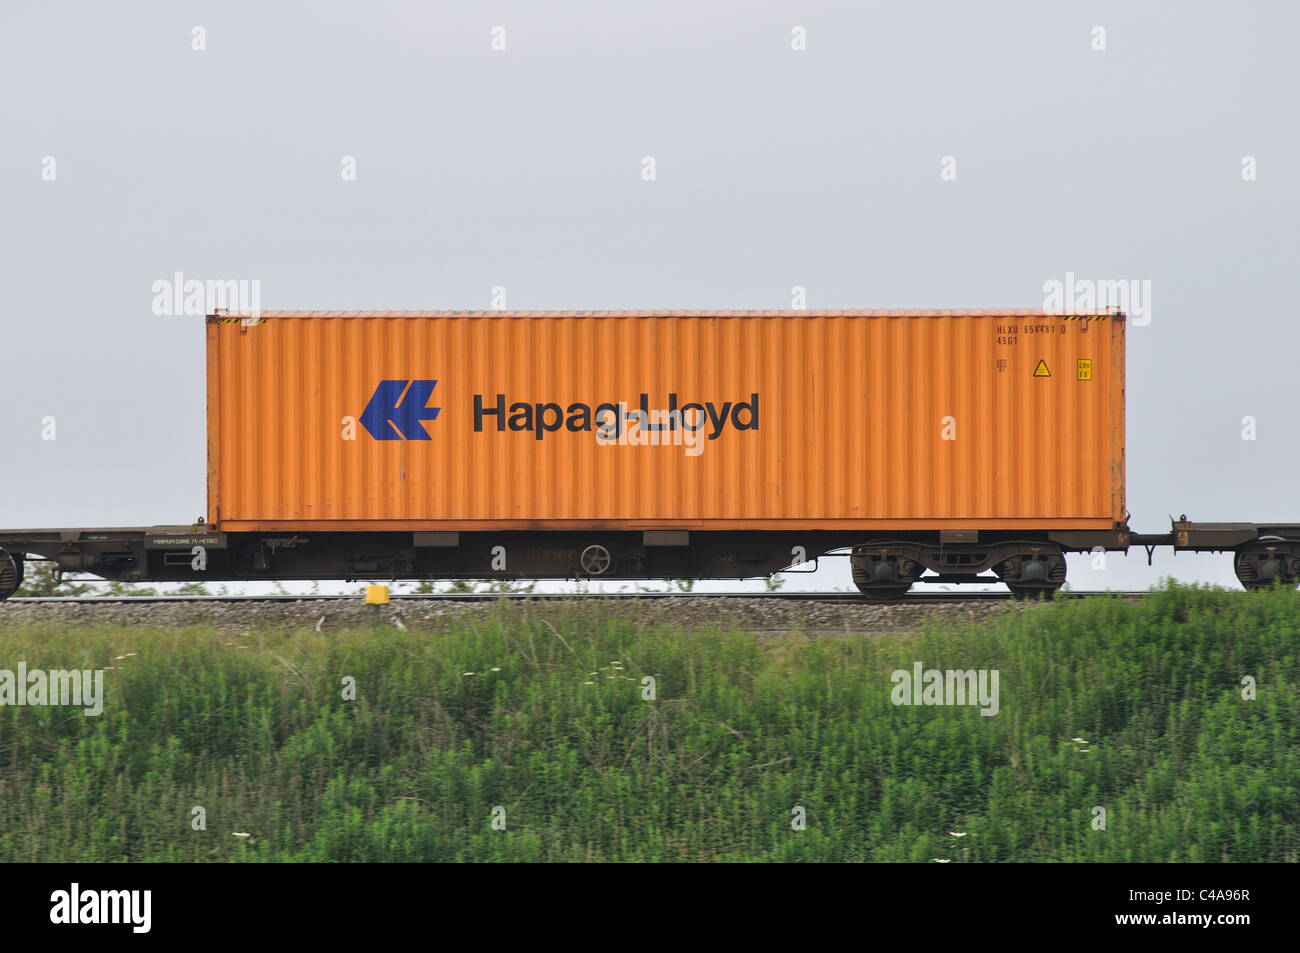 Hapag-Lloyd shipping container on train, UK Stock Photo